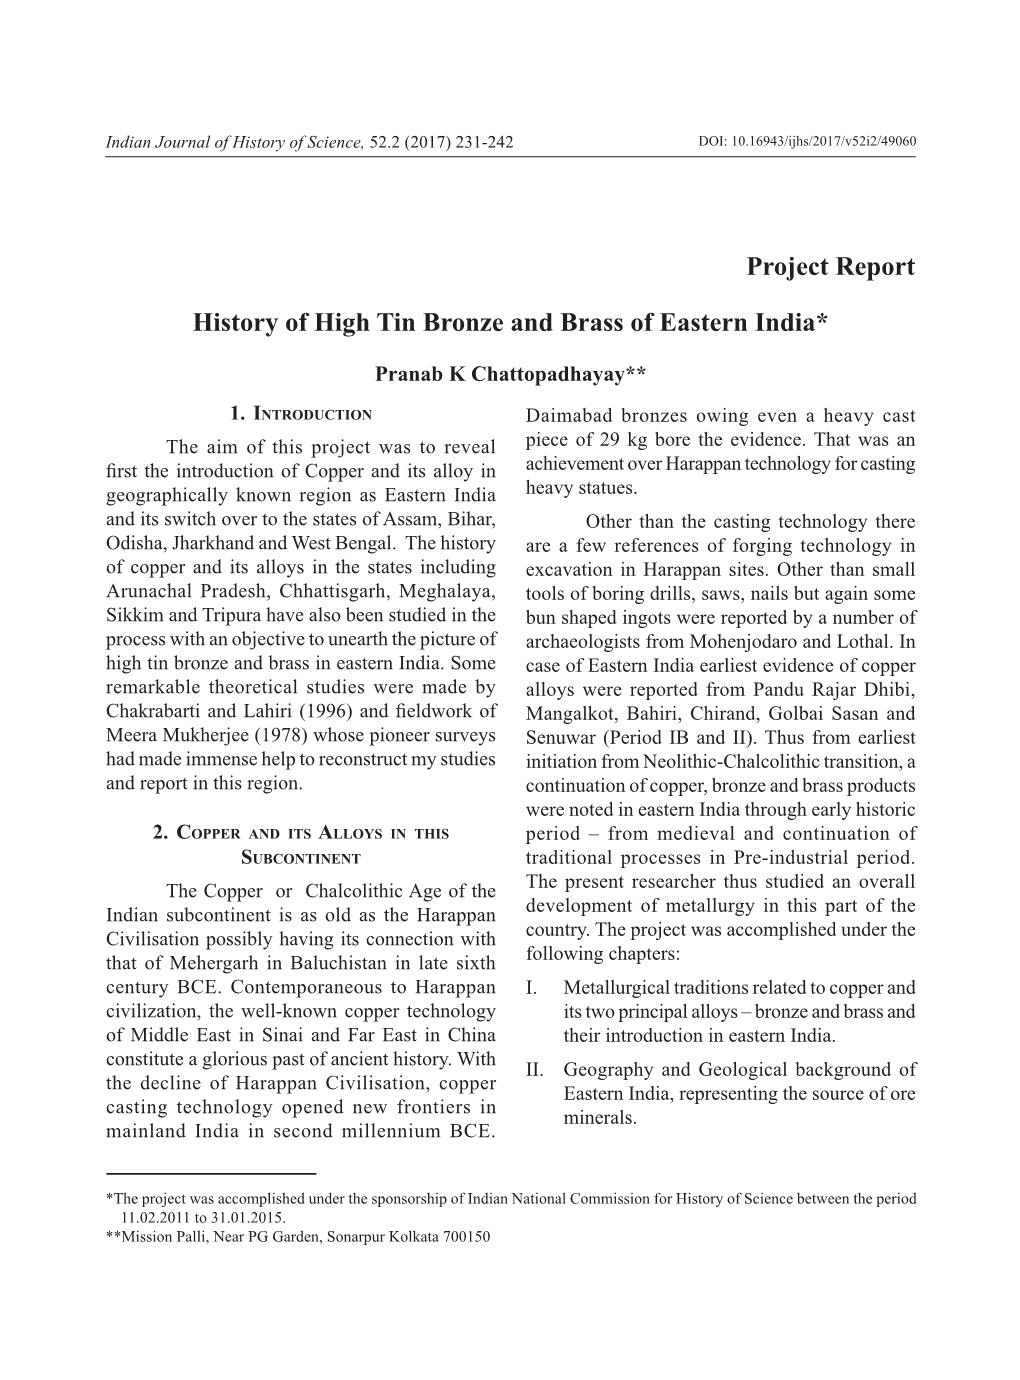 Project Report History of High Tin Bronze and Brass of Eastern India*